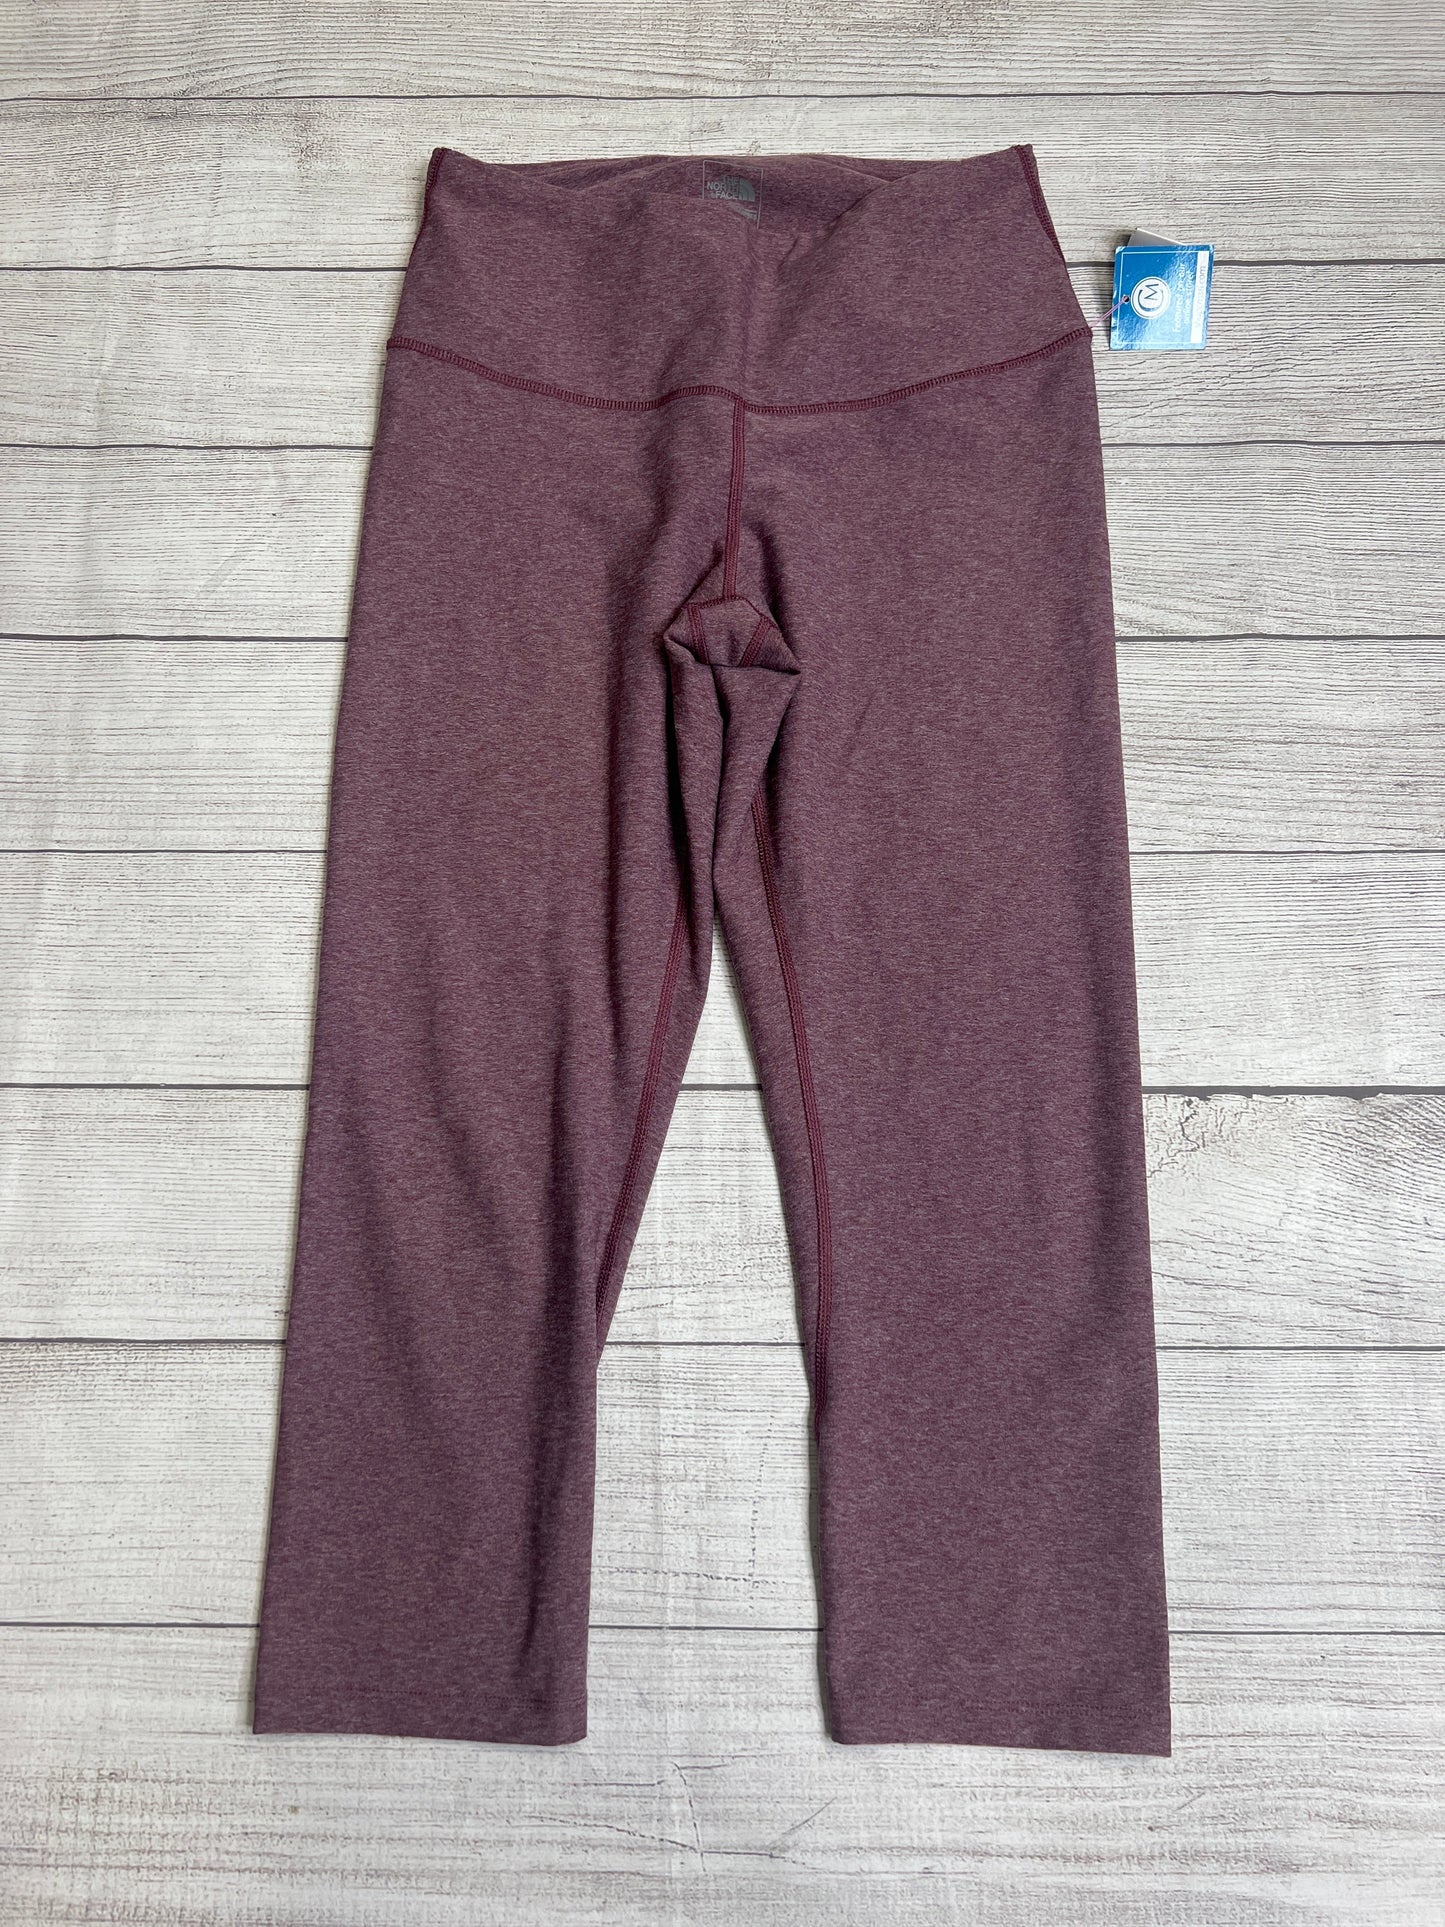 Athletic Cropped/Capri Leggings By The North Face  Size: L